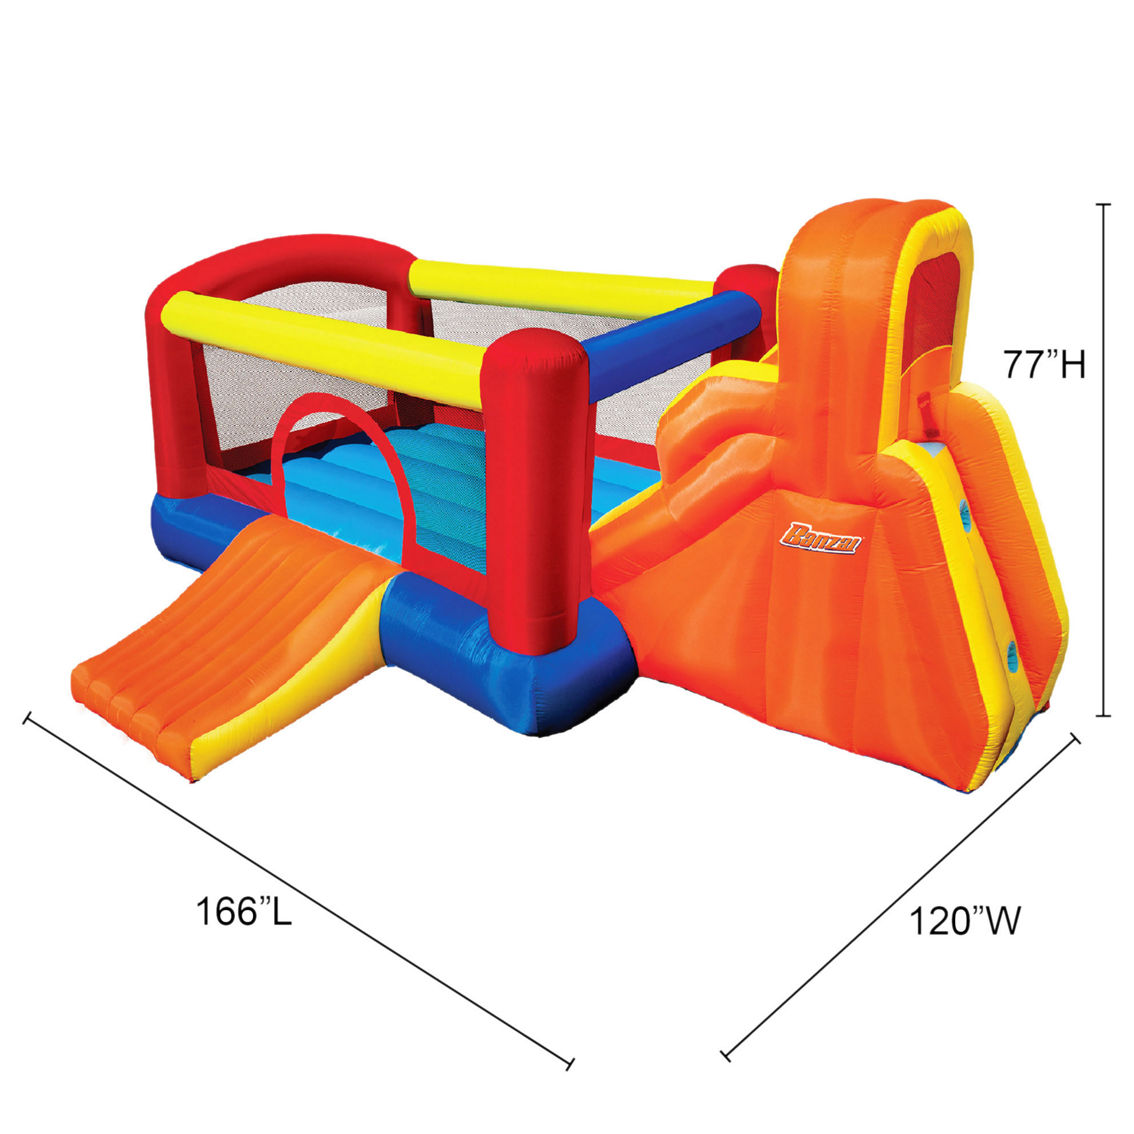 Double Slide Bouncer - Image 6 of 8